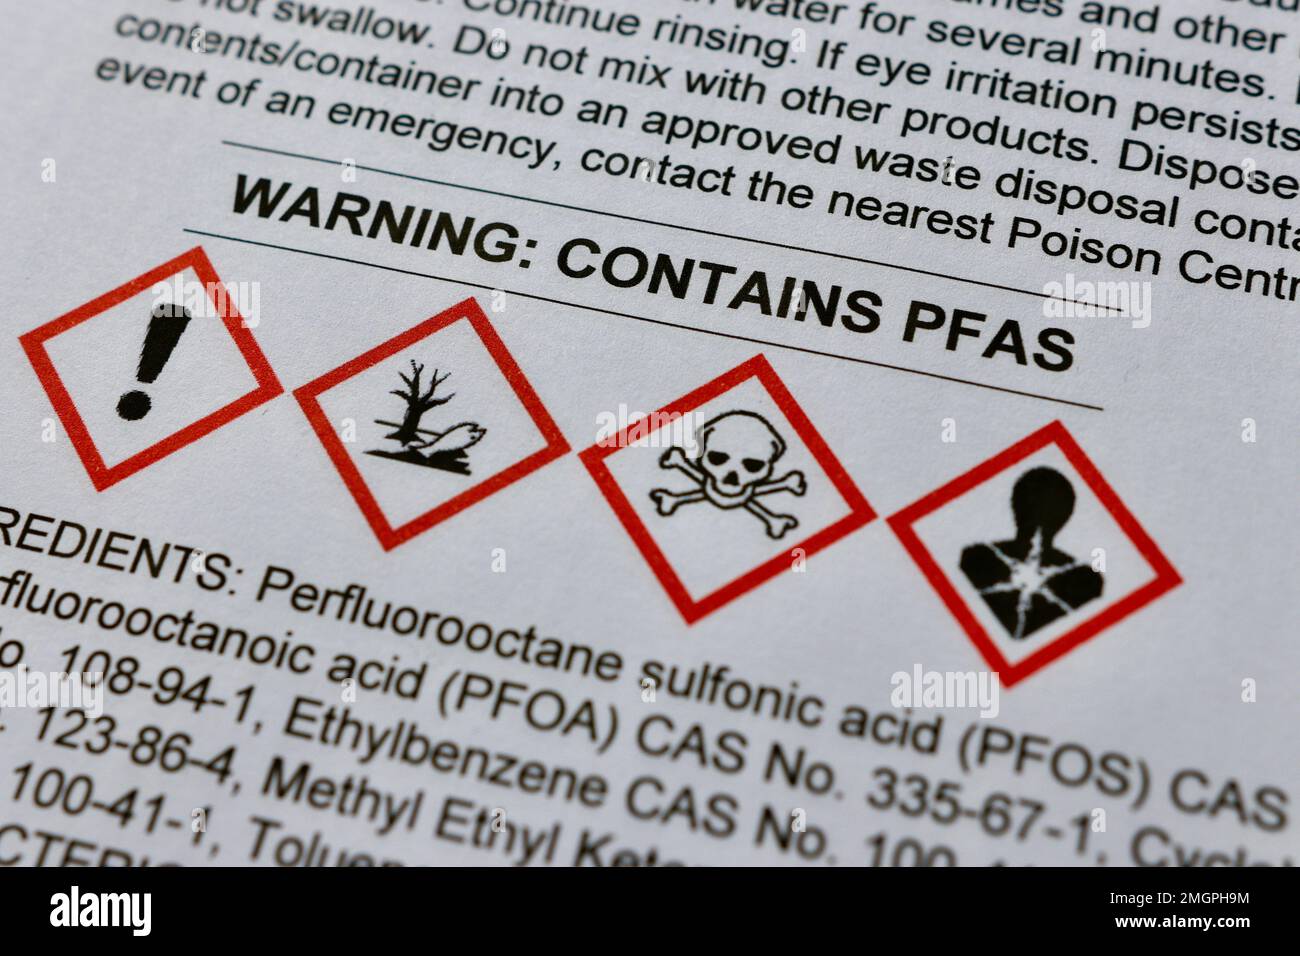 Warning on a Safety Data Sheet showing that the product contains PFAS substances, or forever chemicals. Standard chemical hazard pictograms are shown Stock Photo